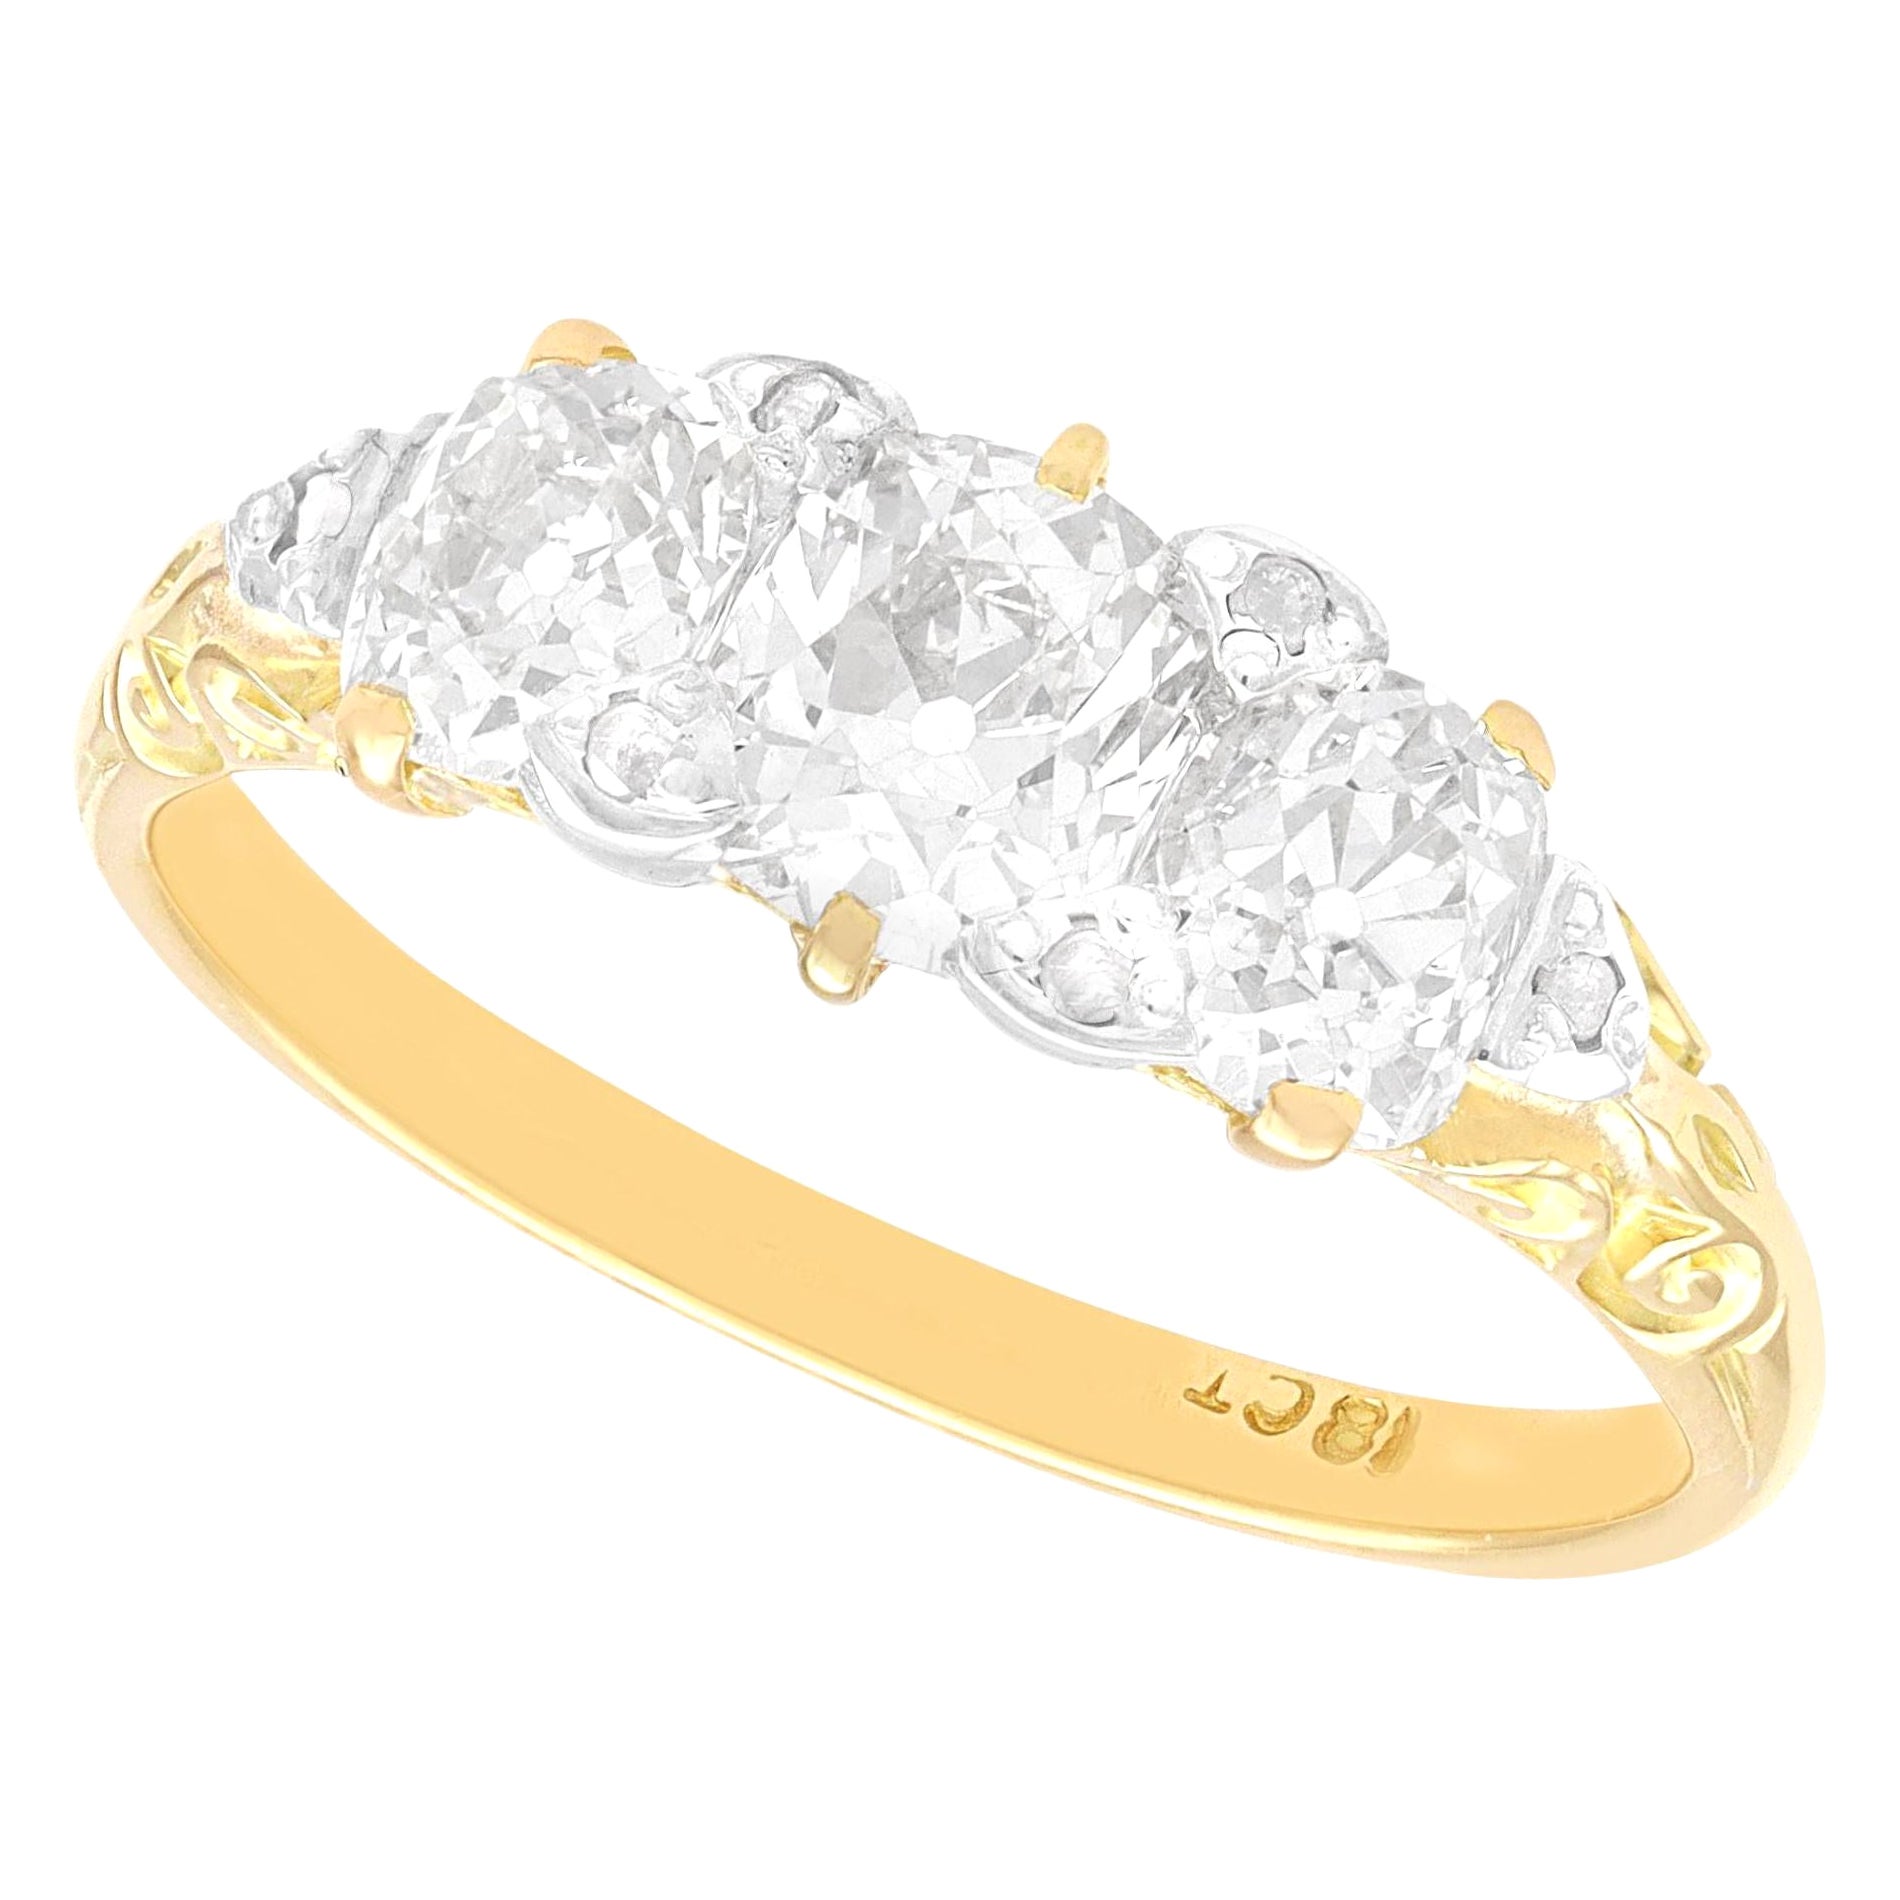 Antique 2.23 Carat Diamond and 18k Yellow Gold Trilogy Ring, circa 1900 For Sale